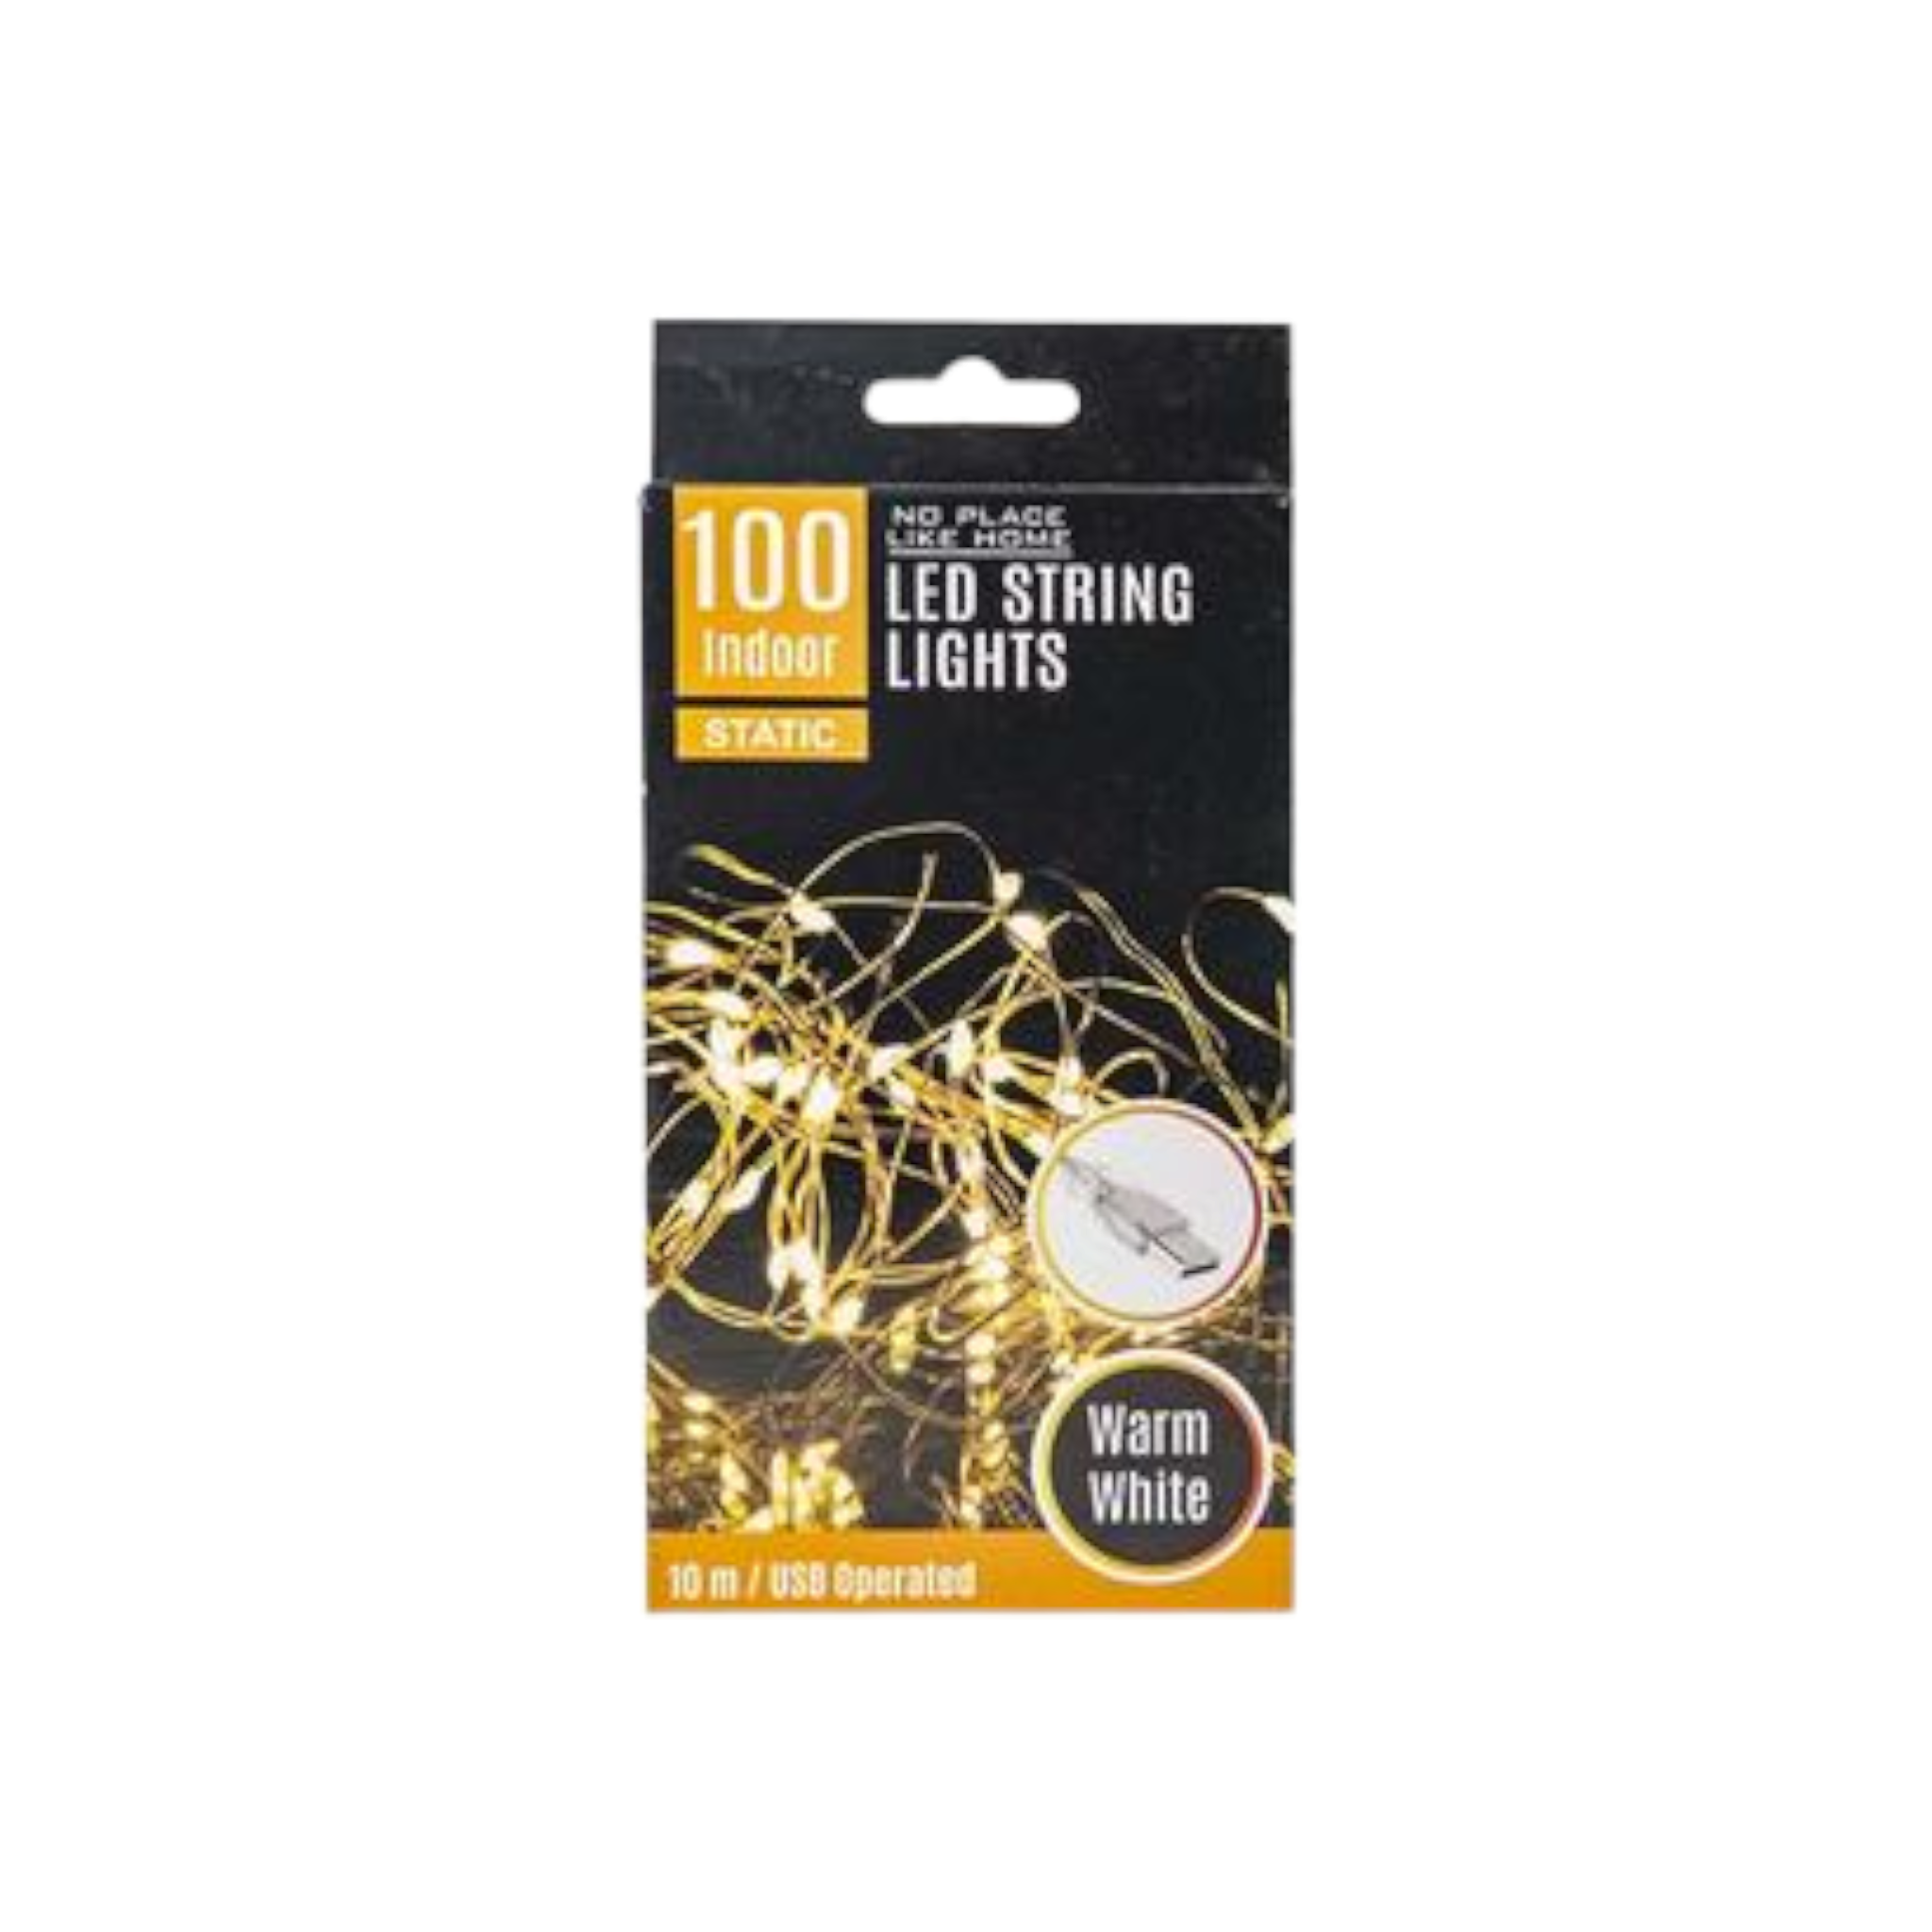 Led String Fairy Lights Indoor 100x Warm White 10m with USB